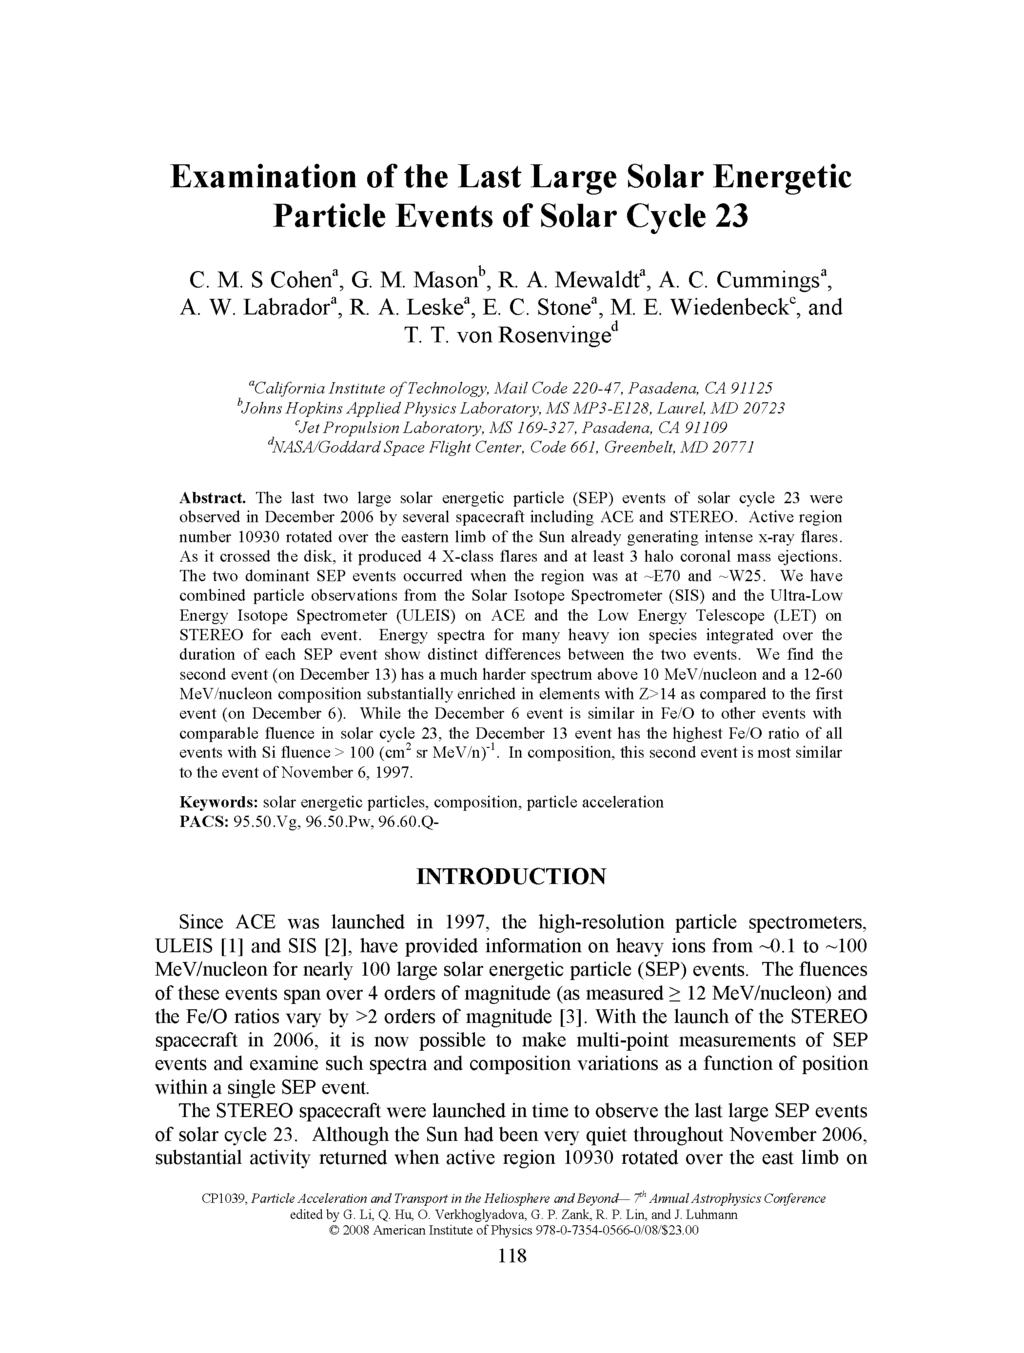 Examination of the Last Large Solar Energetic Particle Events of Solar Cycle 23 C. M. S Cohen', G. M. Mason^ R. A. Mewaldt', A. C. Cummings', A. W. Labrador", R. A. Leske", E. C. Stone", M. E. Wiedenbeck", and T.